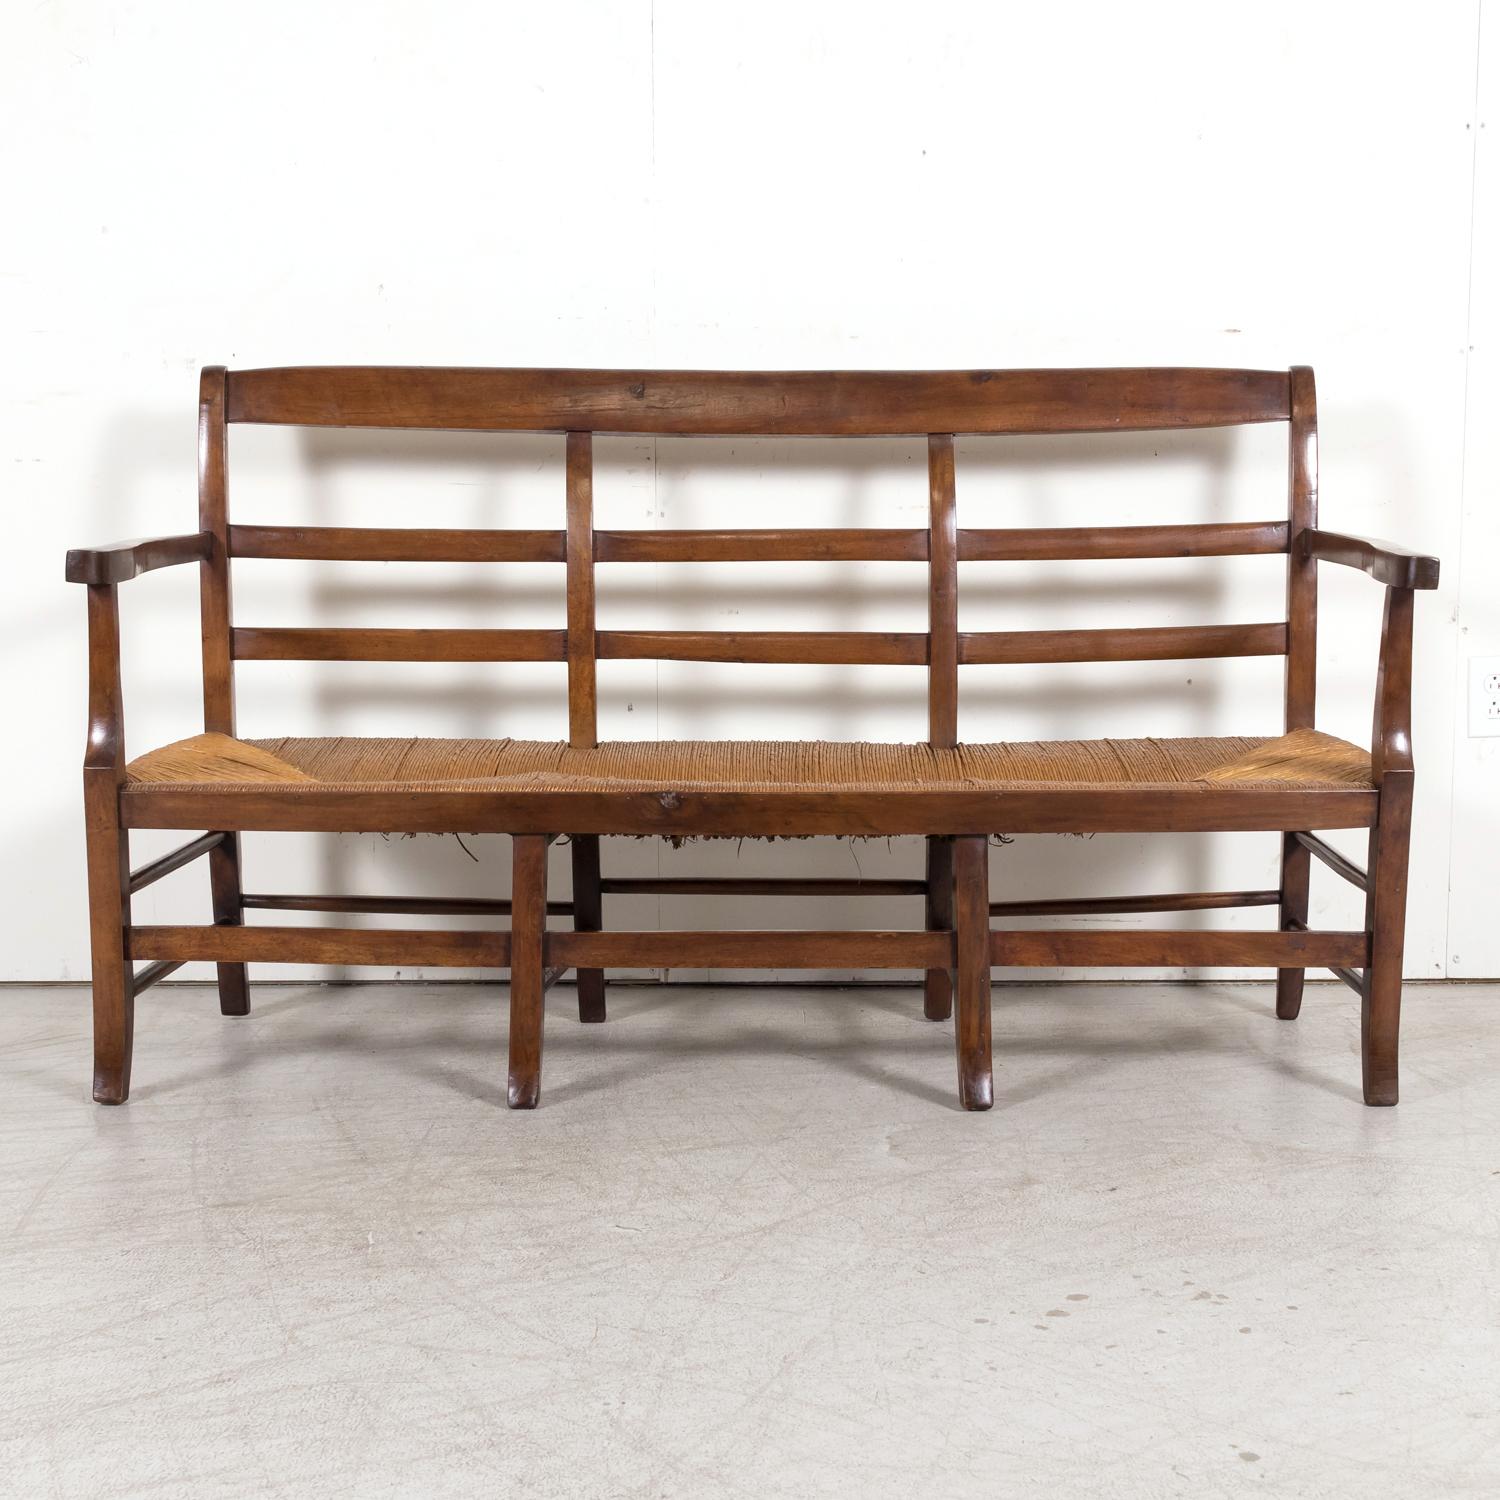 Mid-19th Century French Radassier or Ladder Back Rush Seat Bench 1